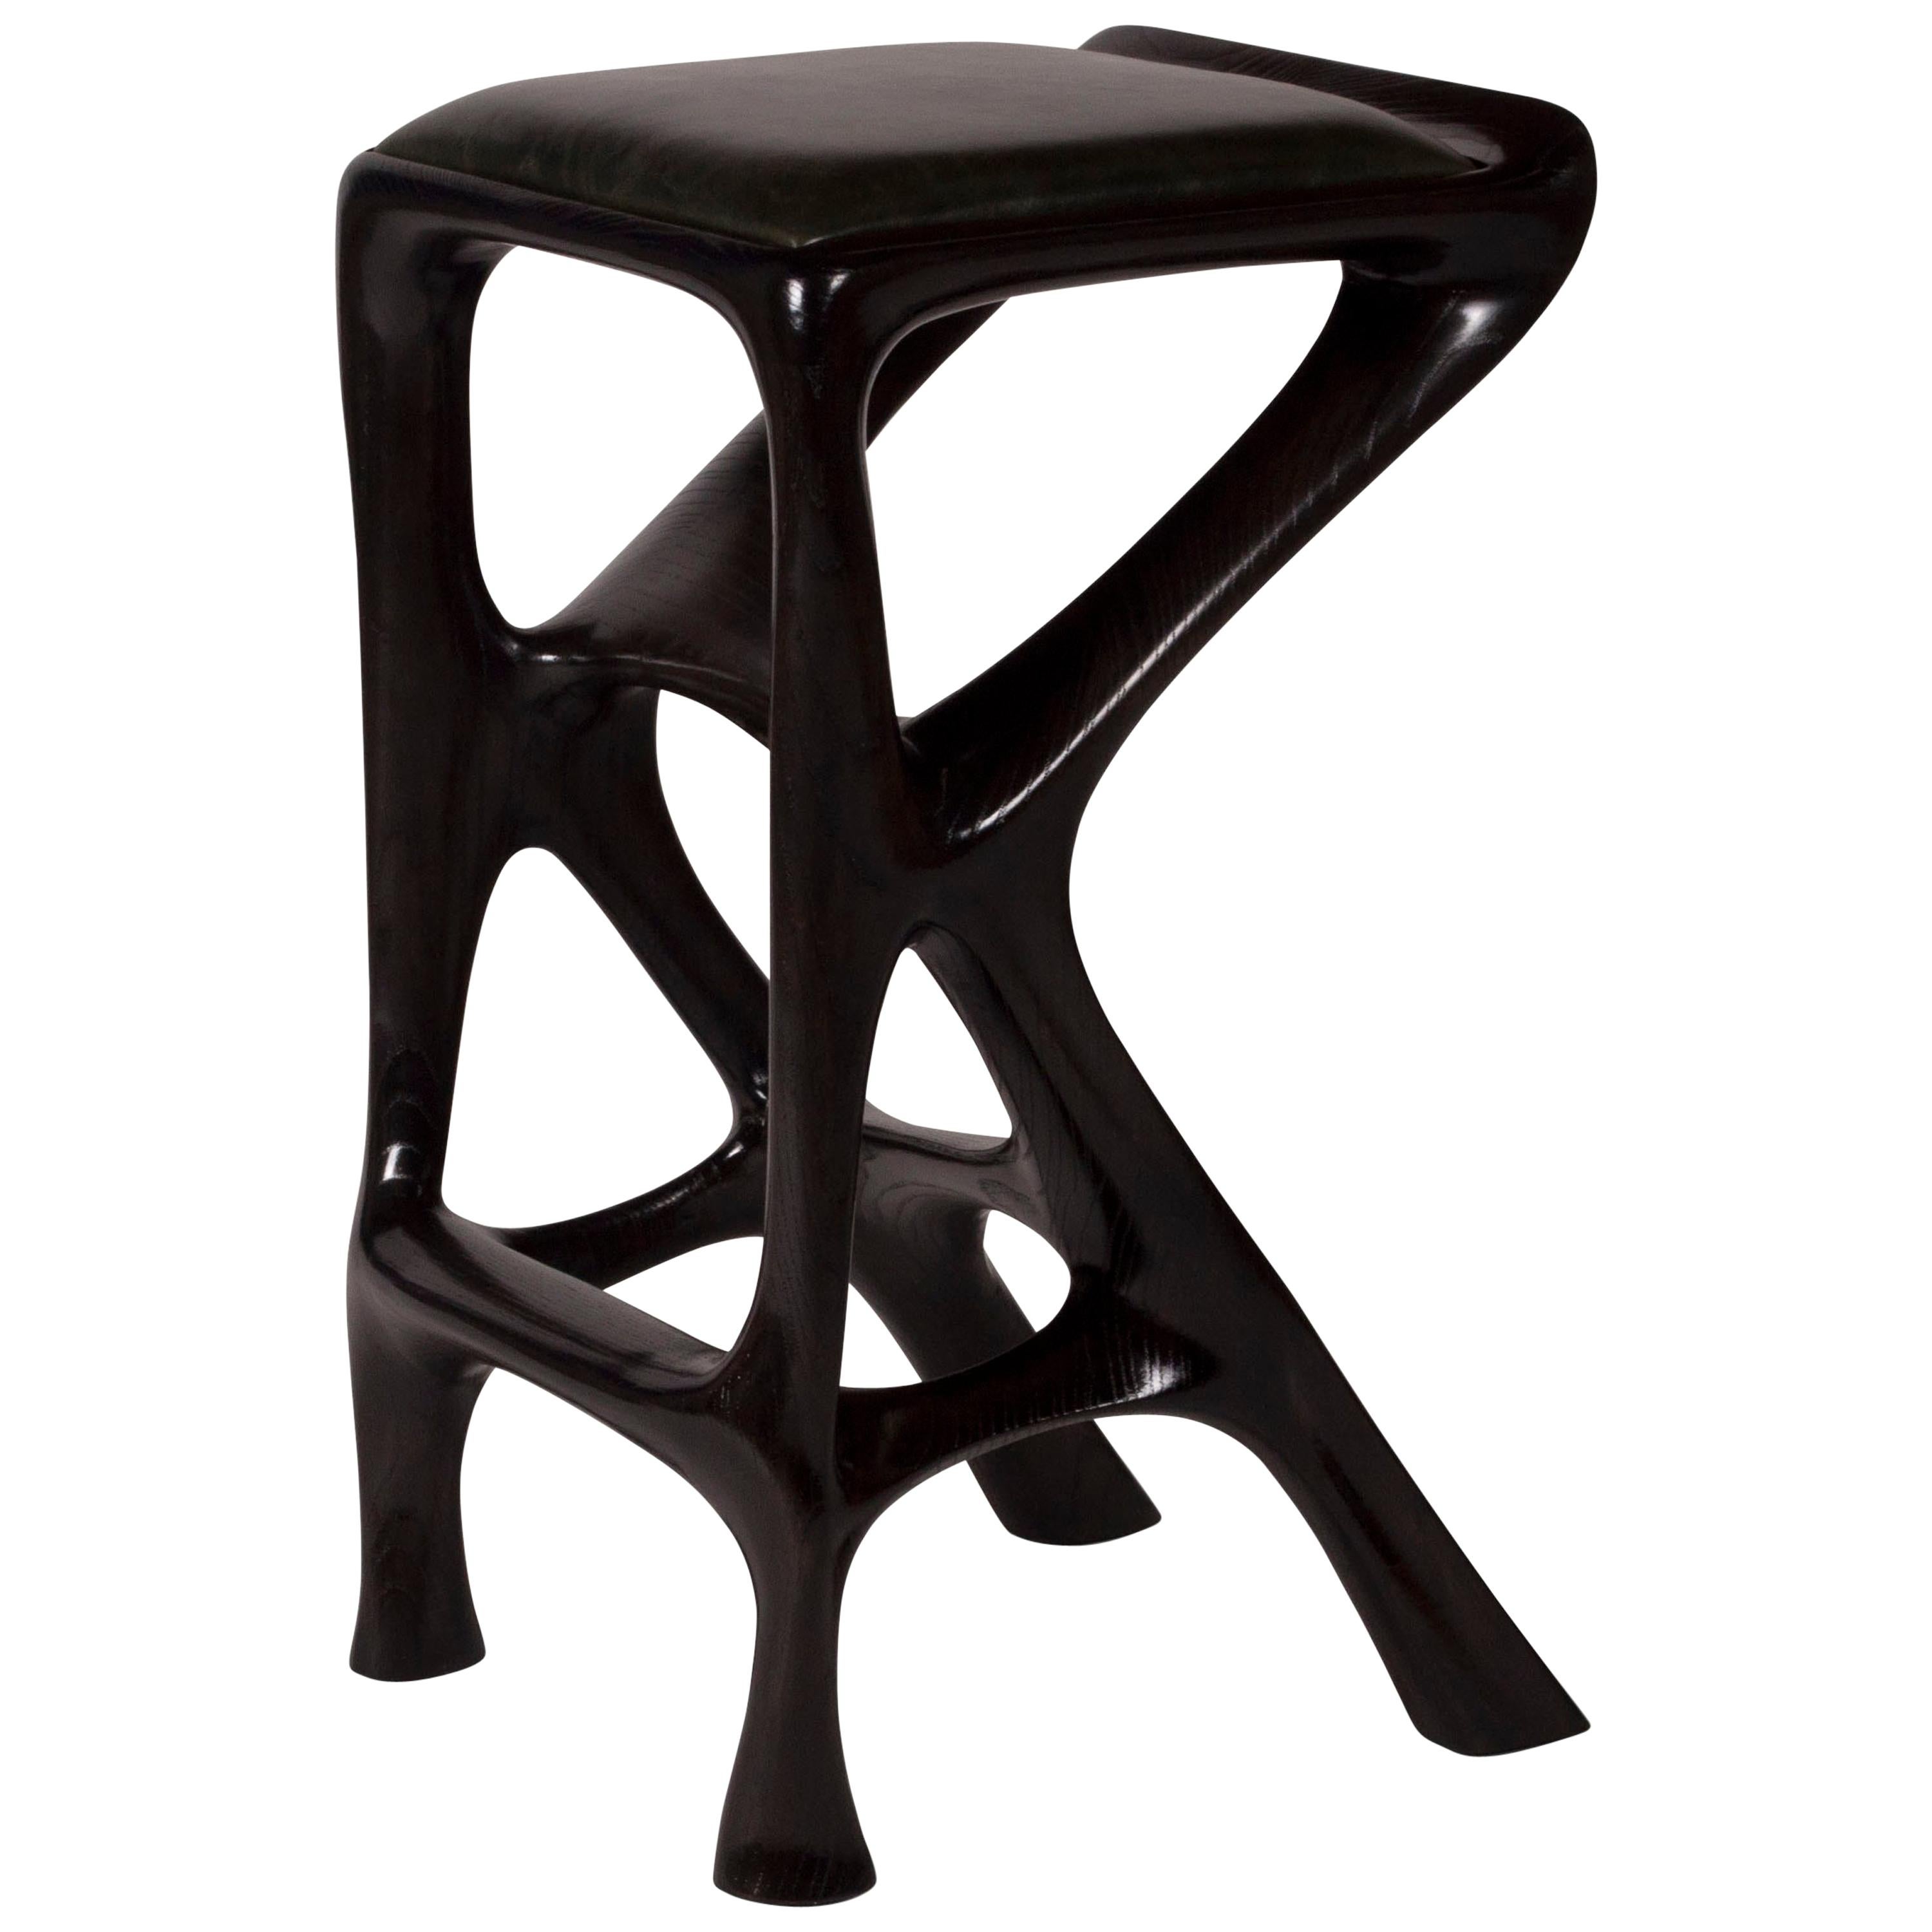 Amorph Chimera Bar stool Solid Wood with Ebony Finish Counter Height For Sale